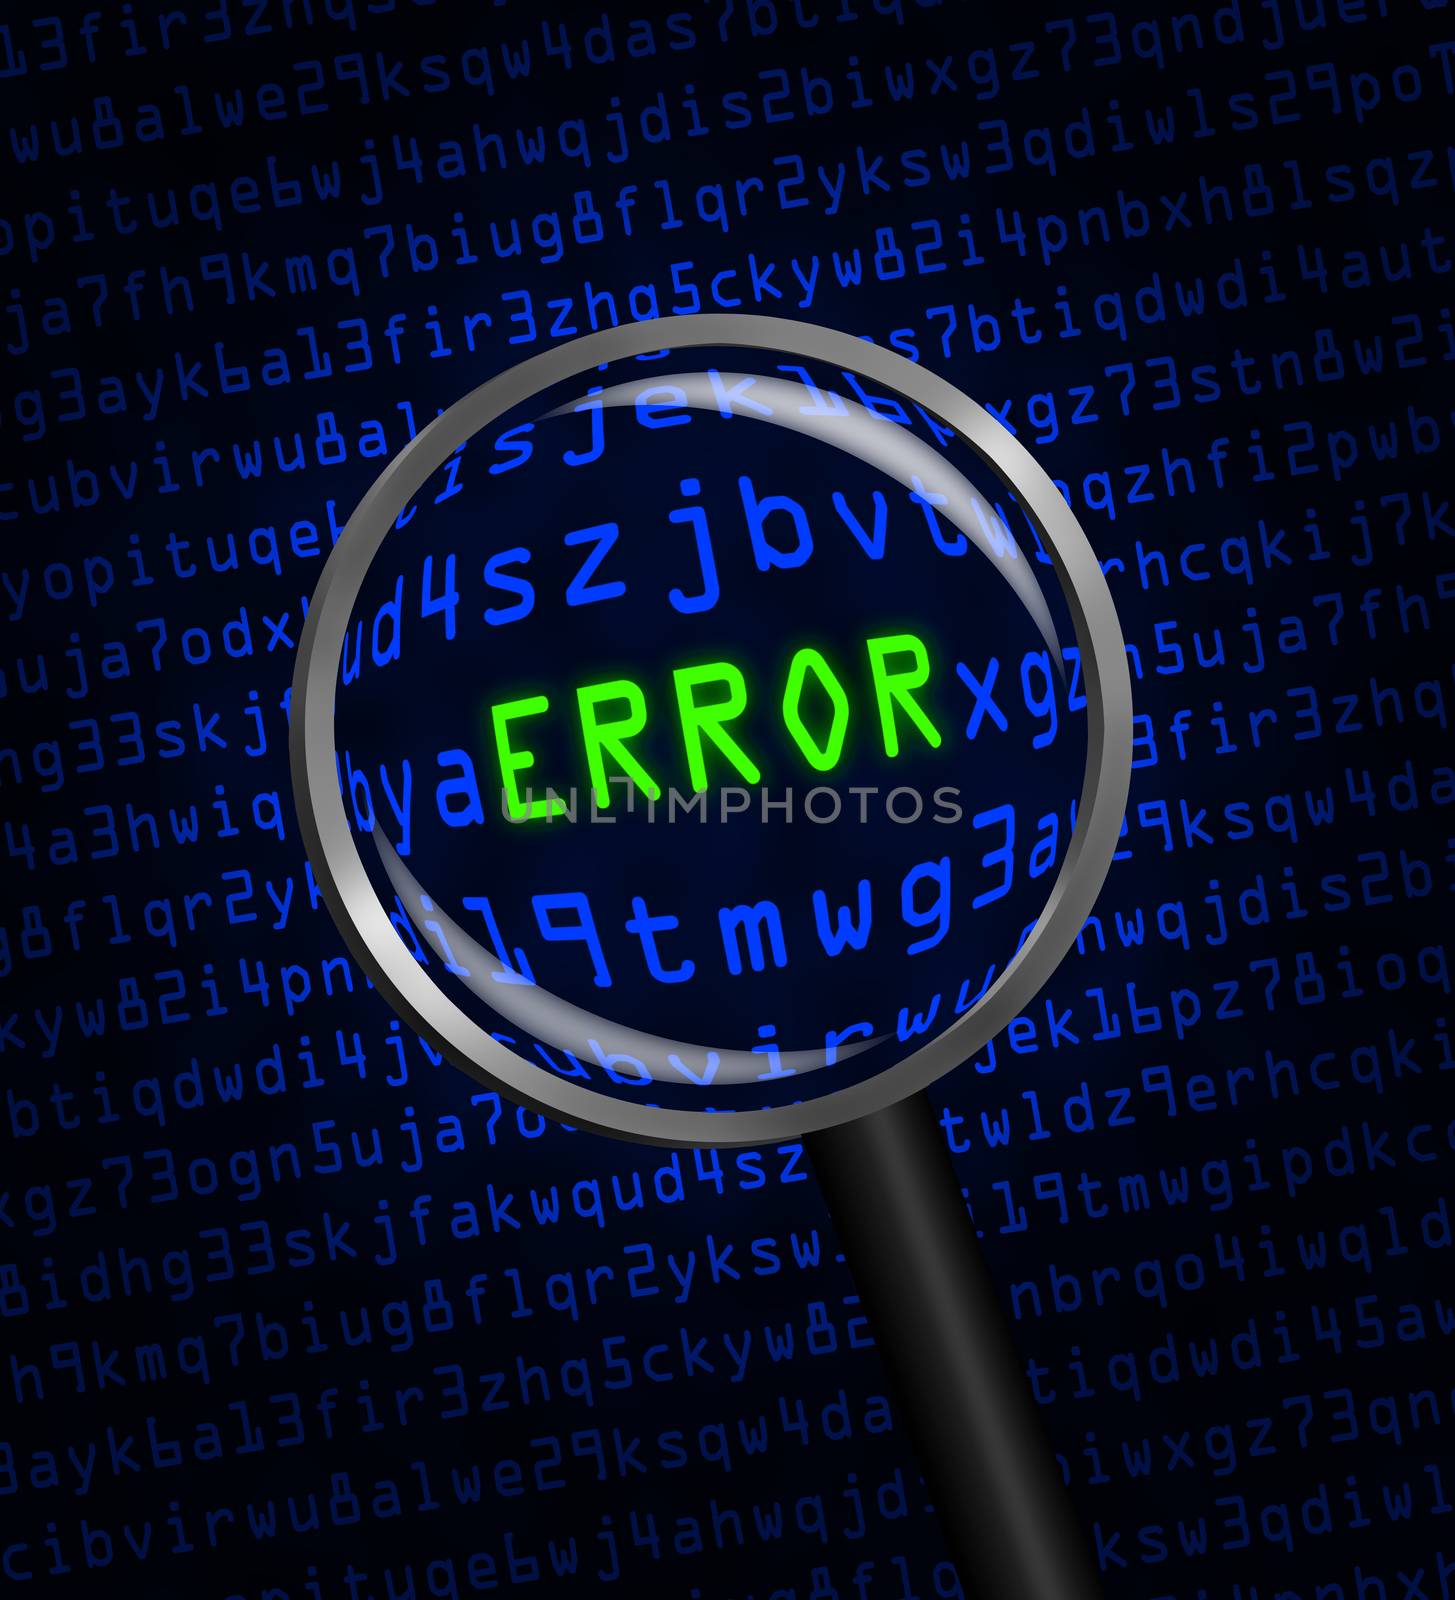 The word "ERROR" in green revealed in blue computer machine code through a magnifying glass.